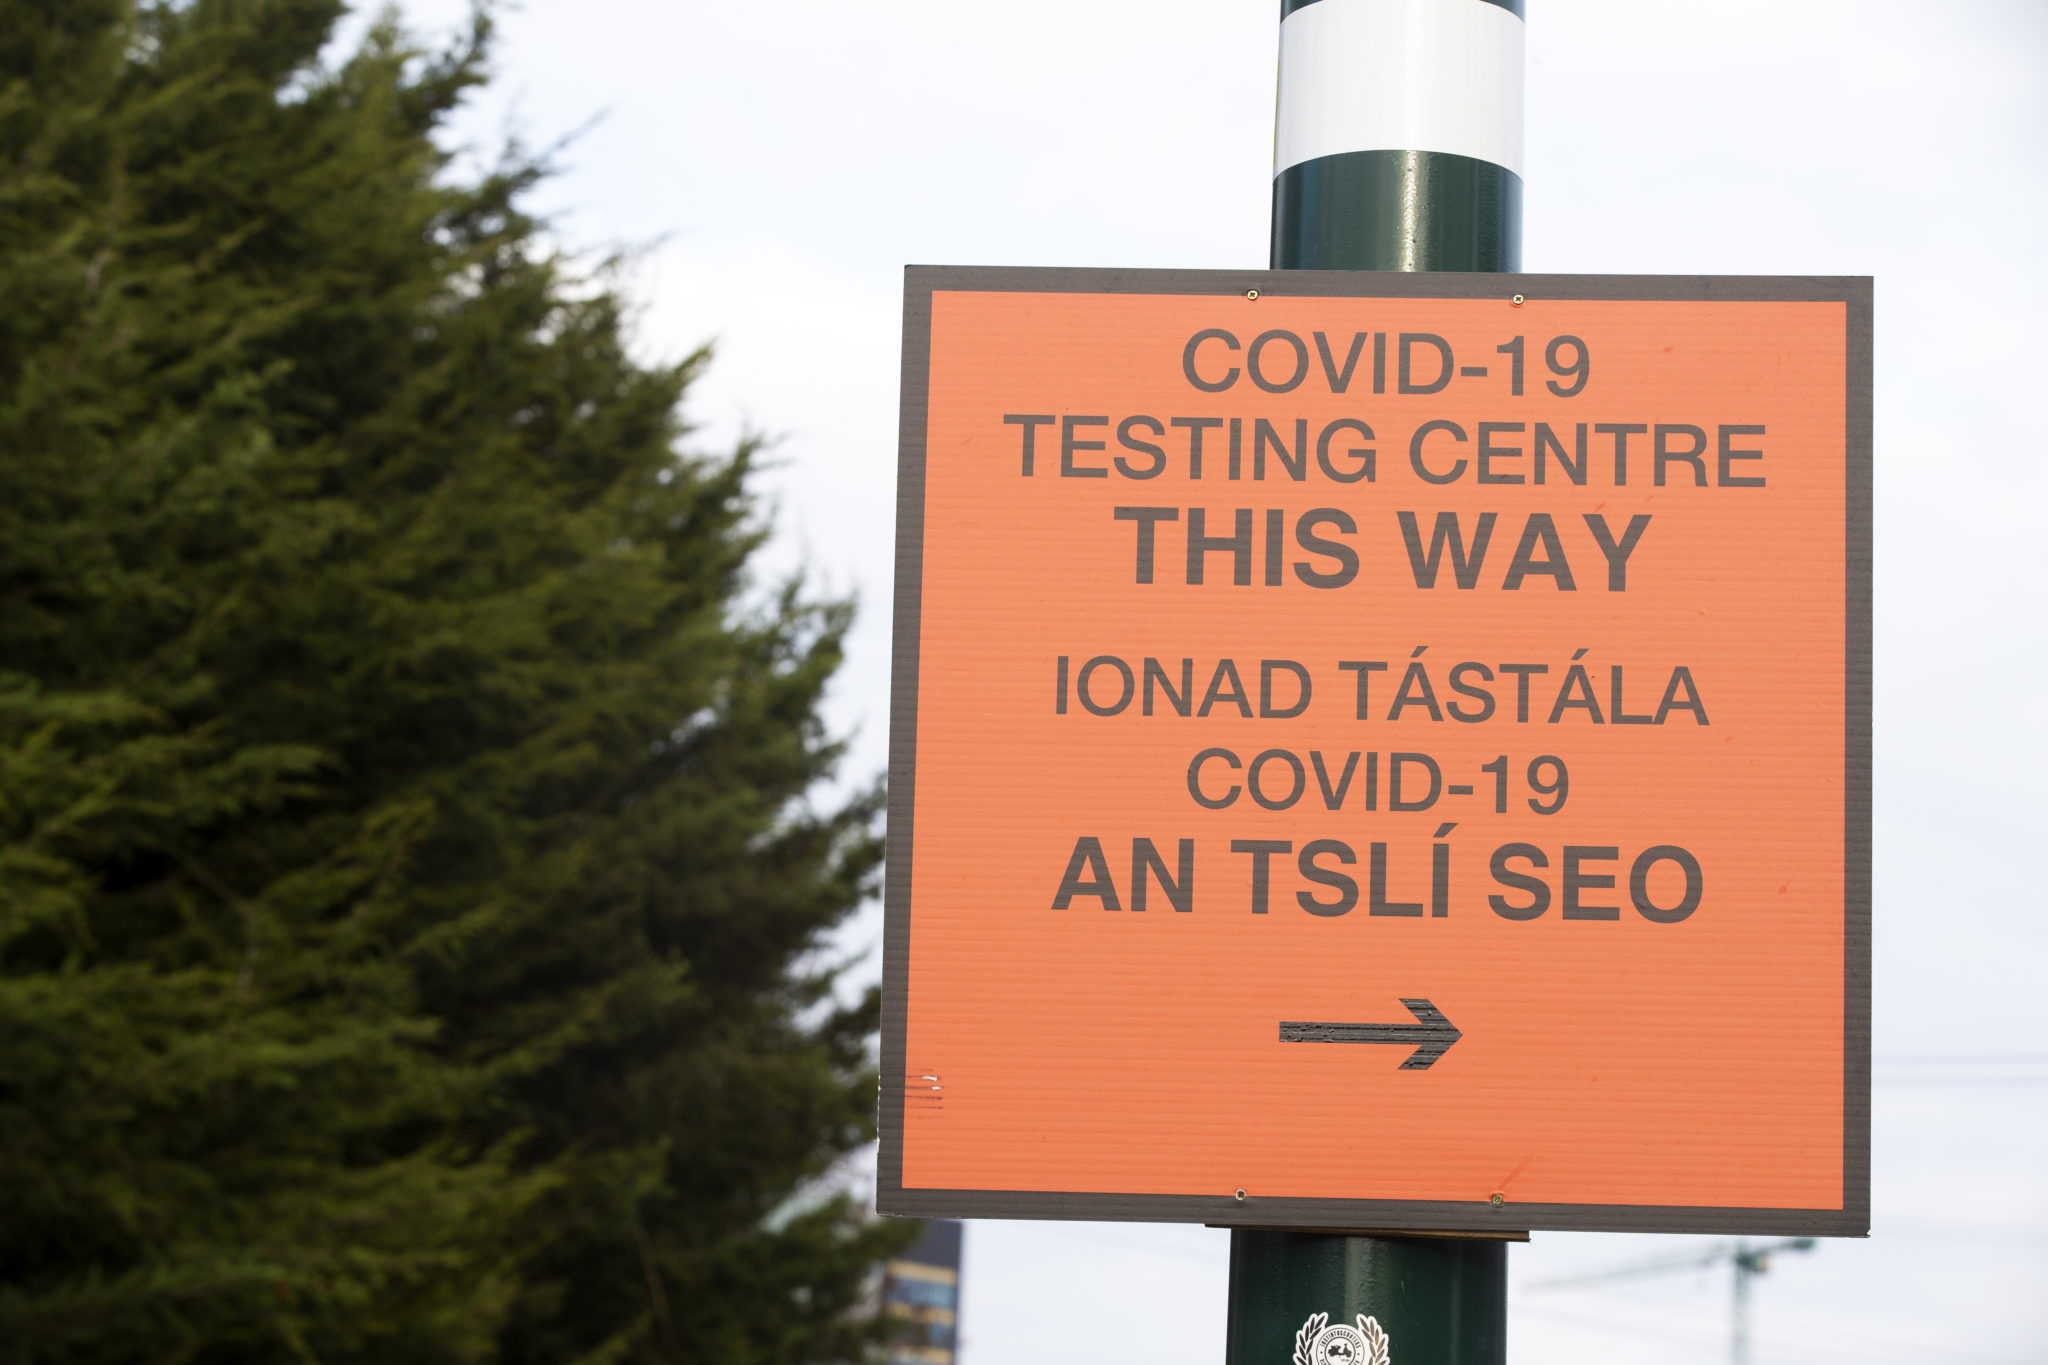 Sign for a COVID-19 test centre in Dublin